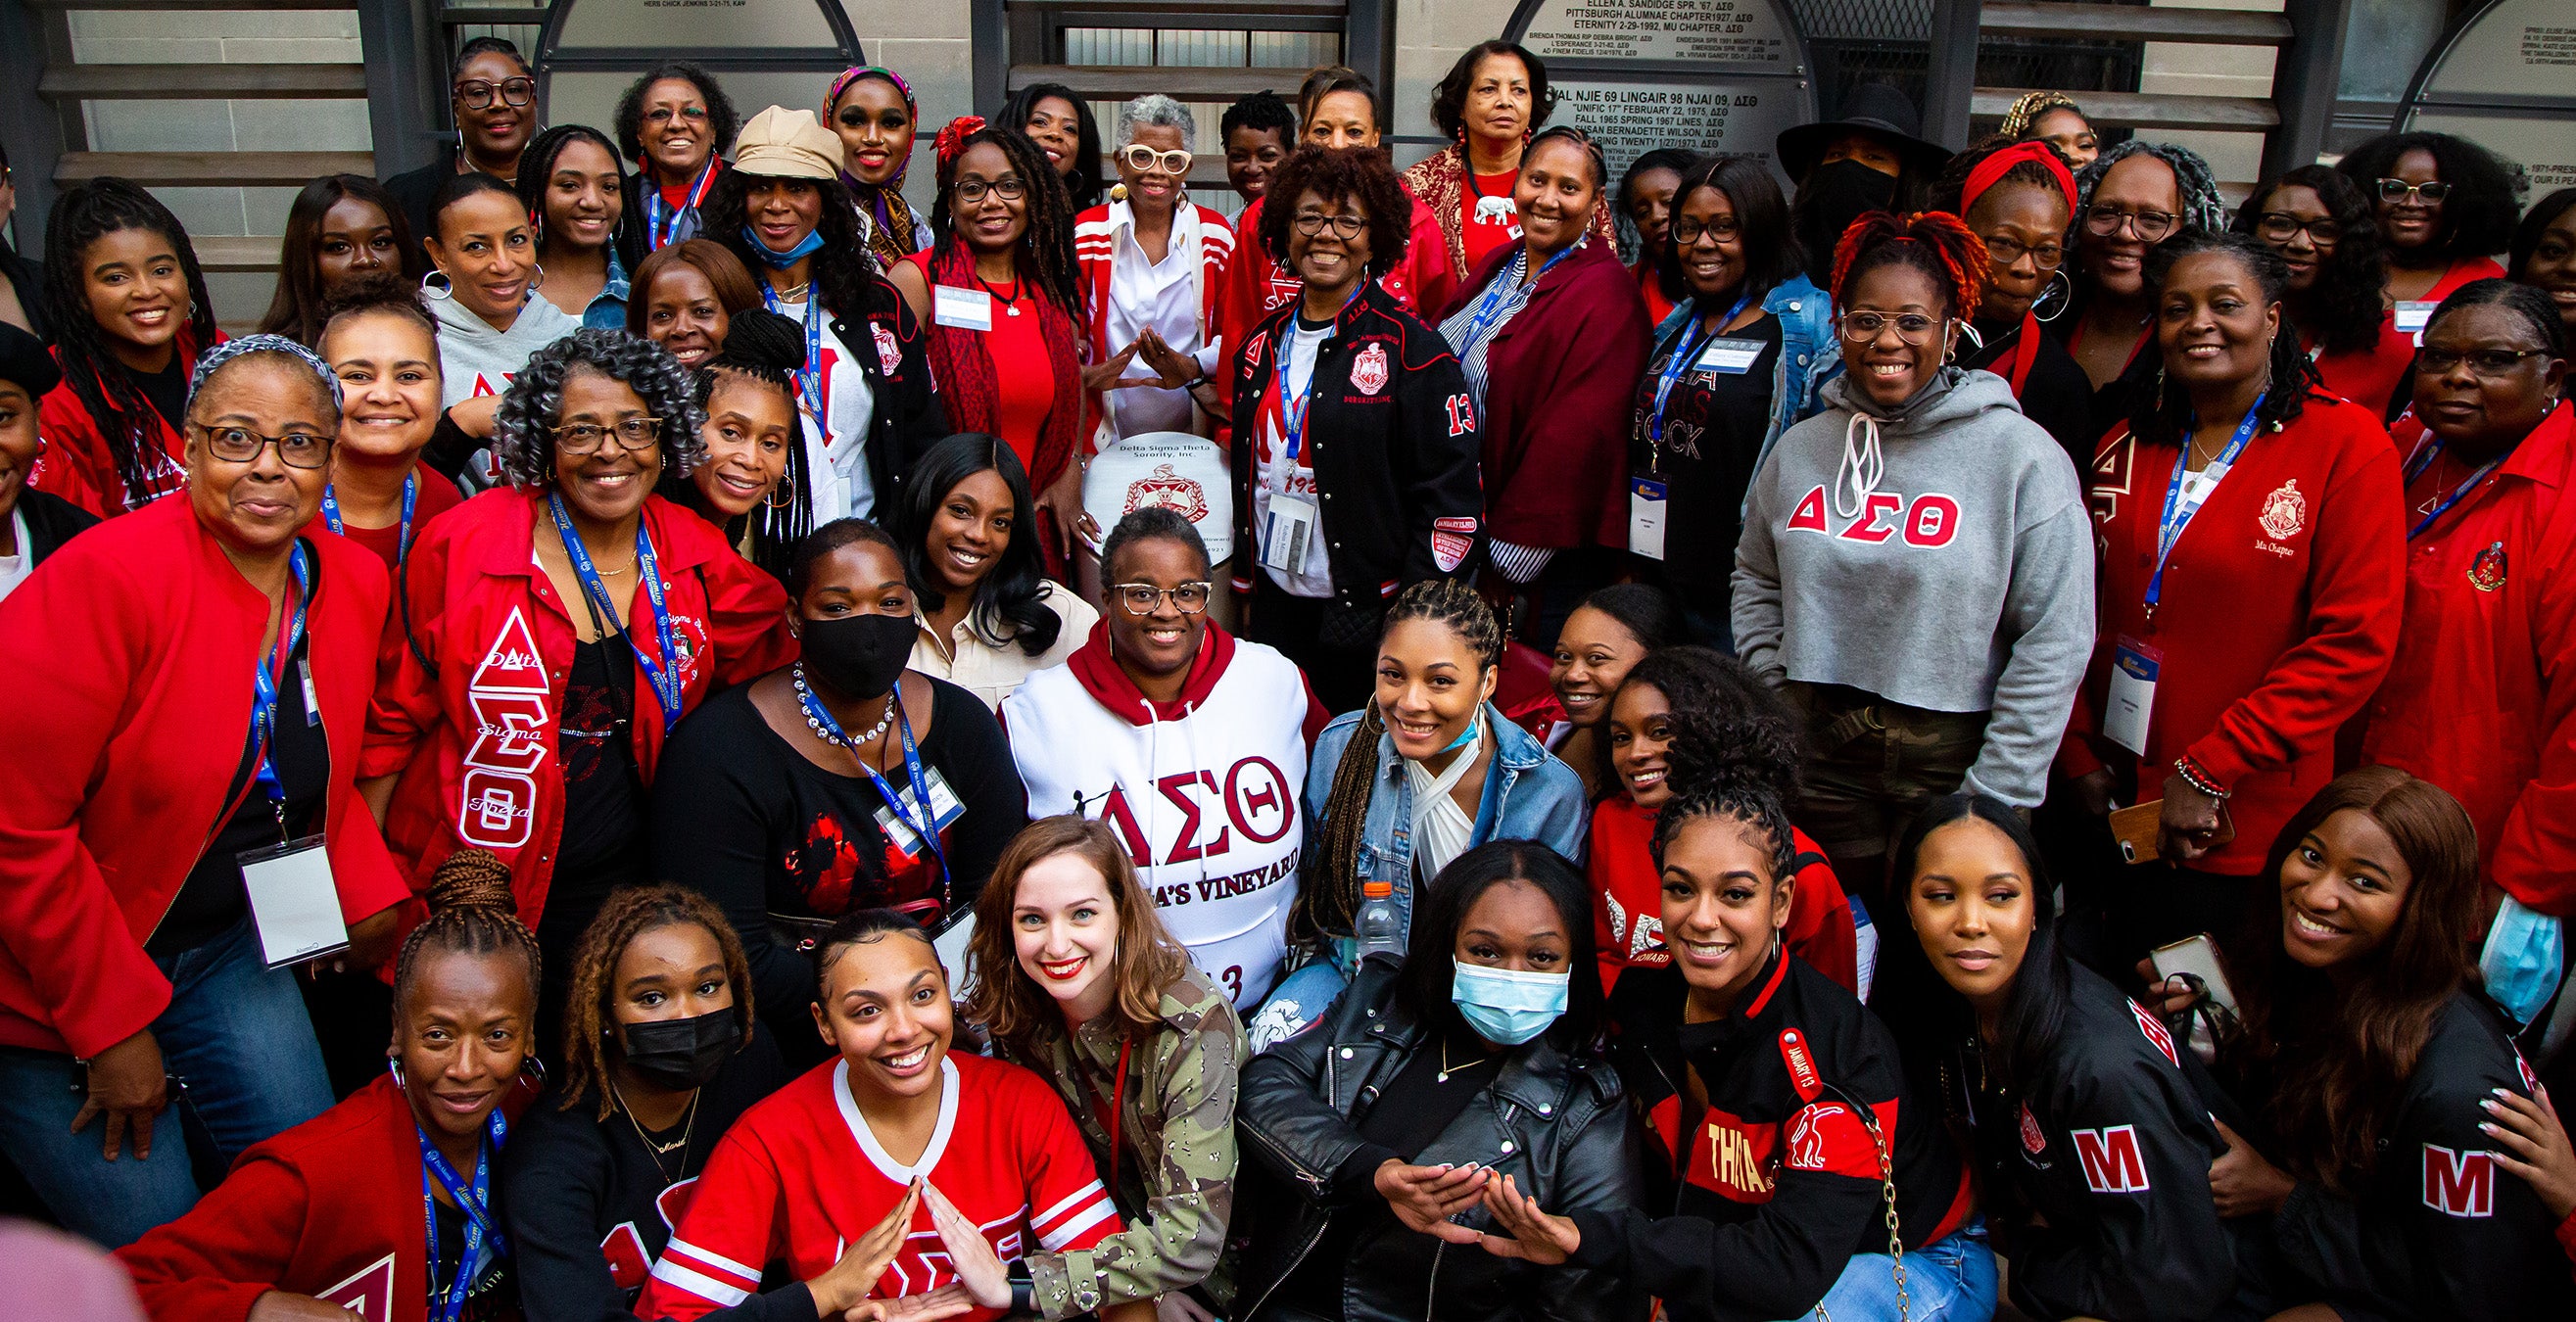 Members of Delta Sigma Theta pose wearing red clothing displaying Greek letters